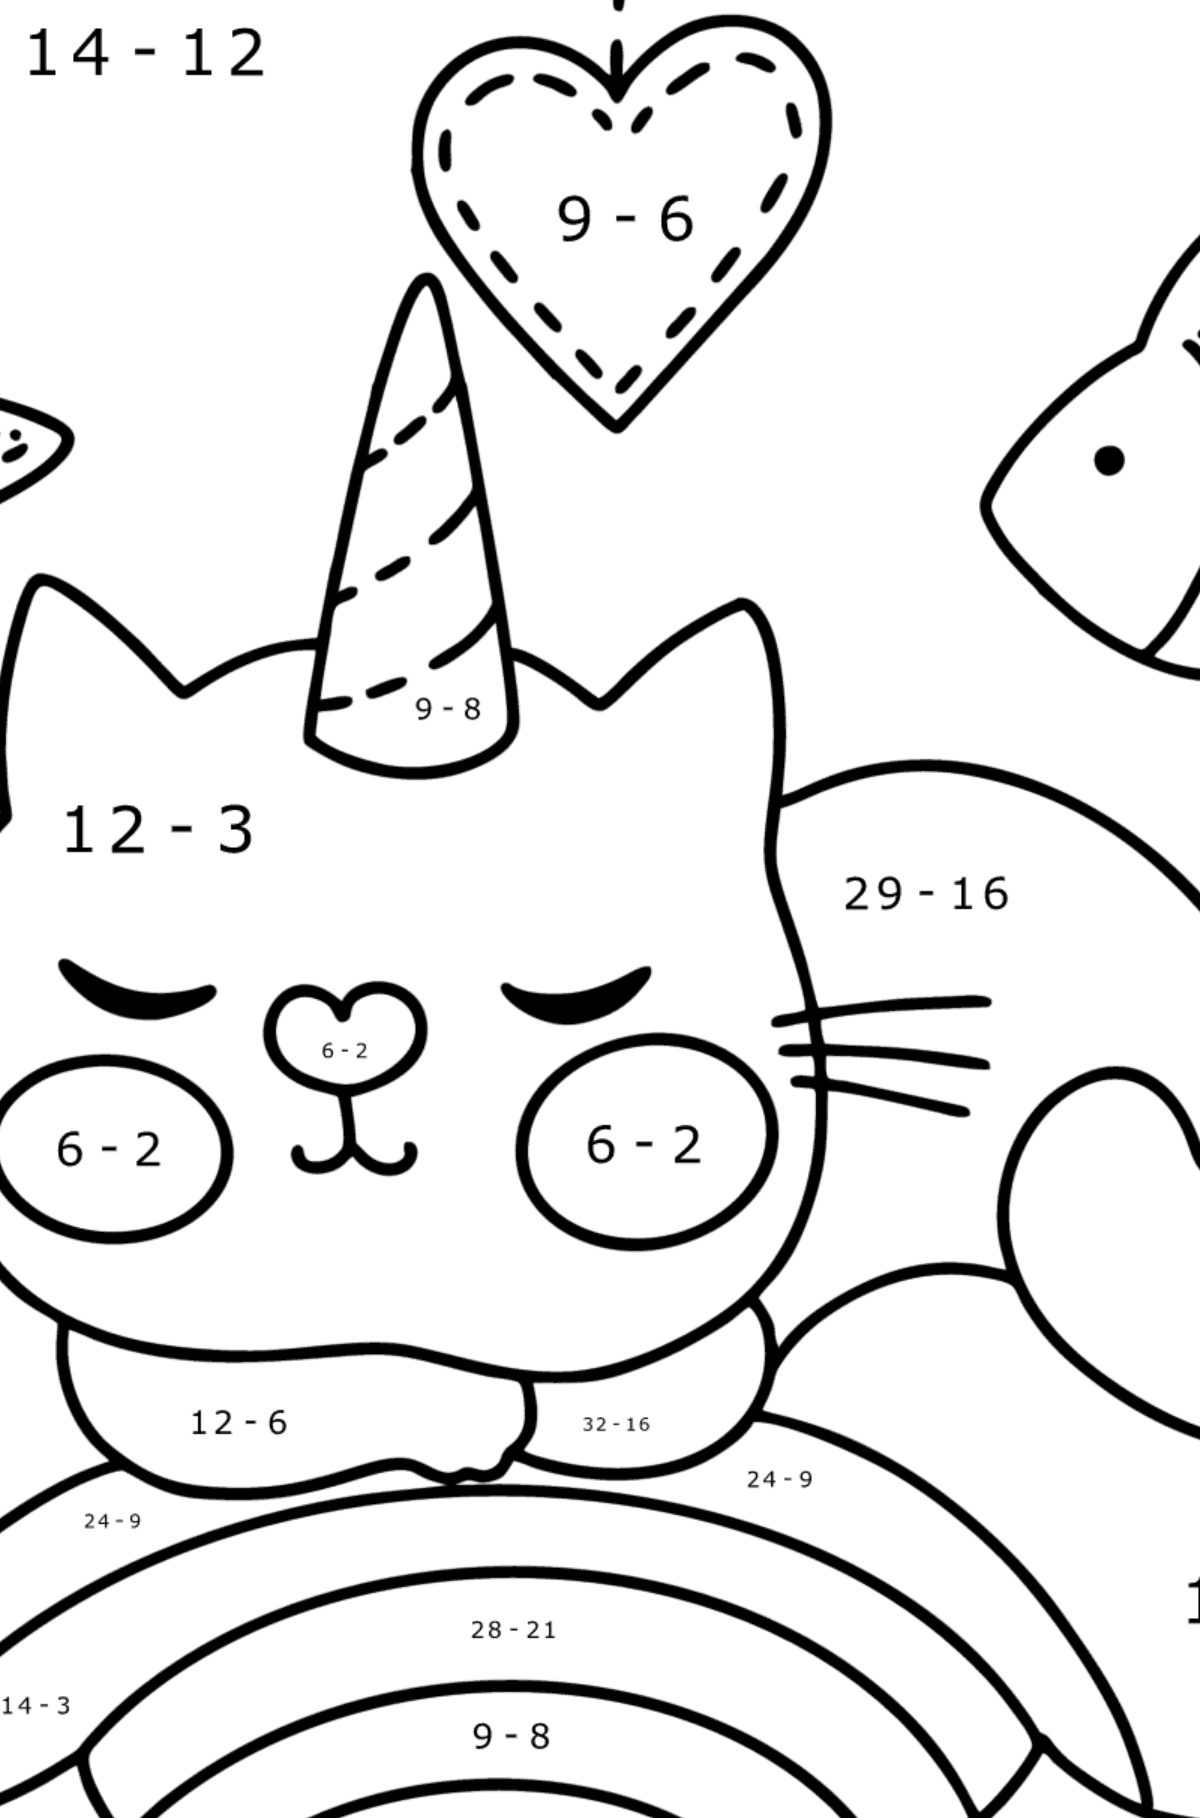 Cute cat unicorn coloring page - Math Coloring - Subtraction for Kids